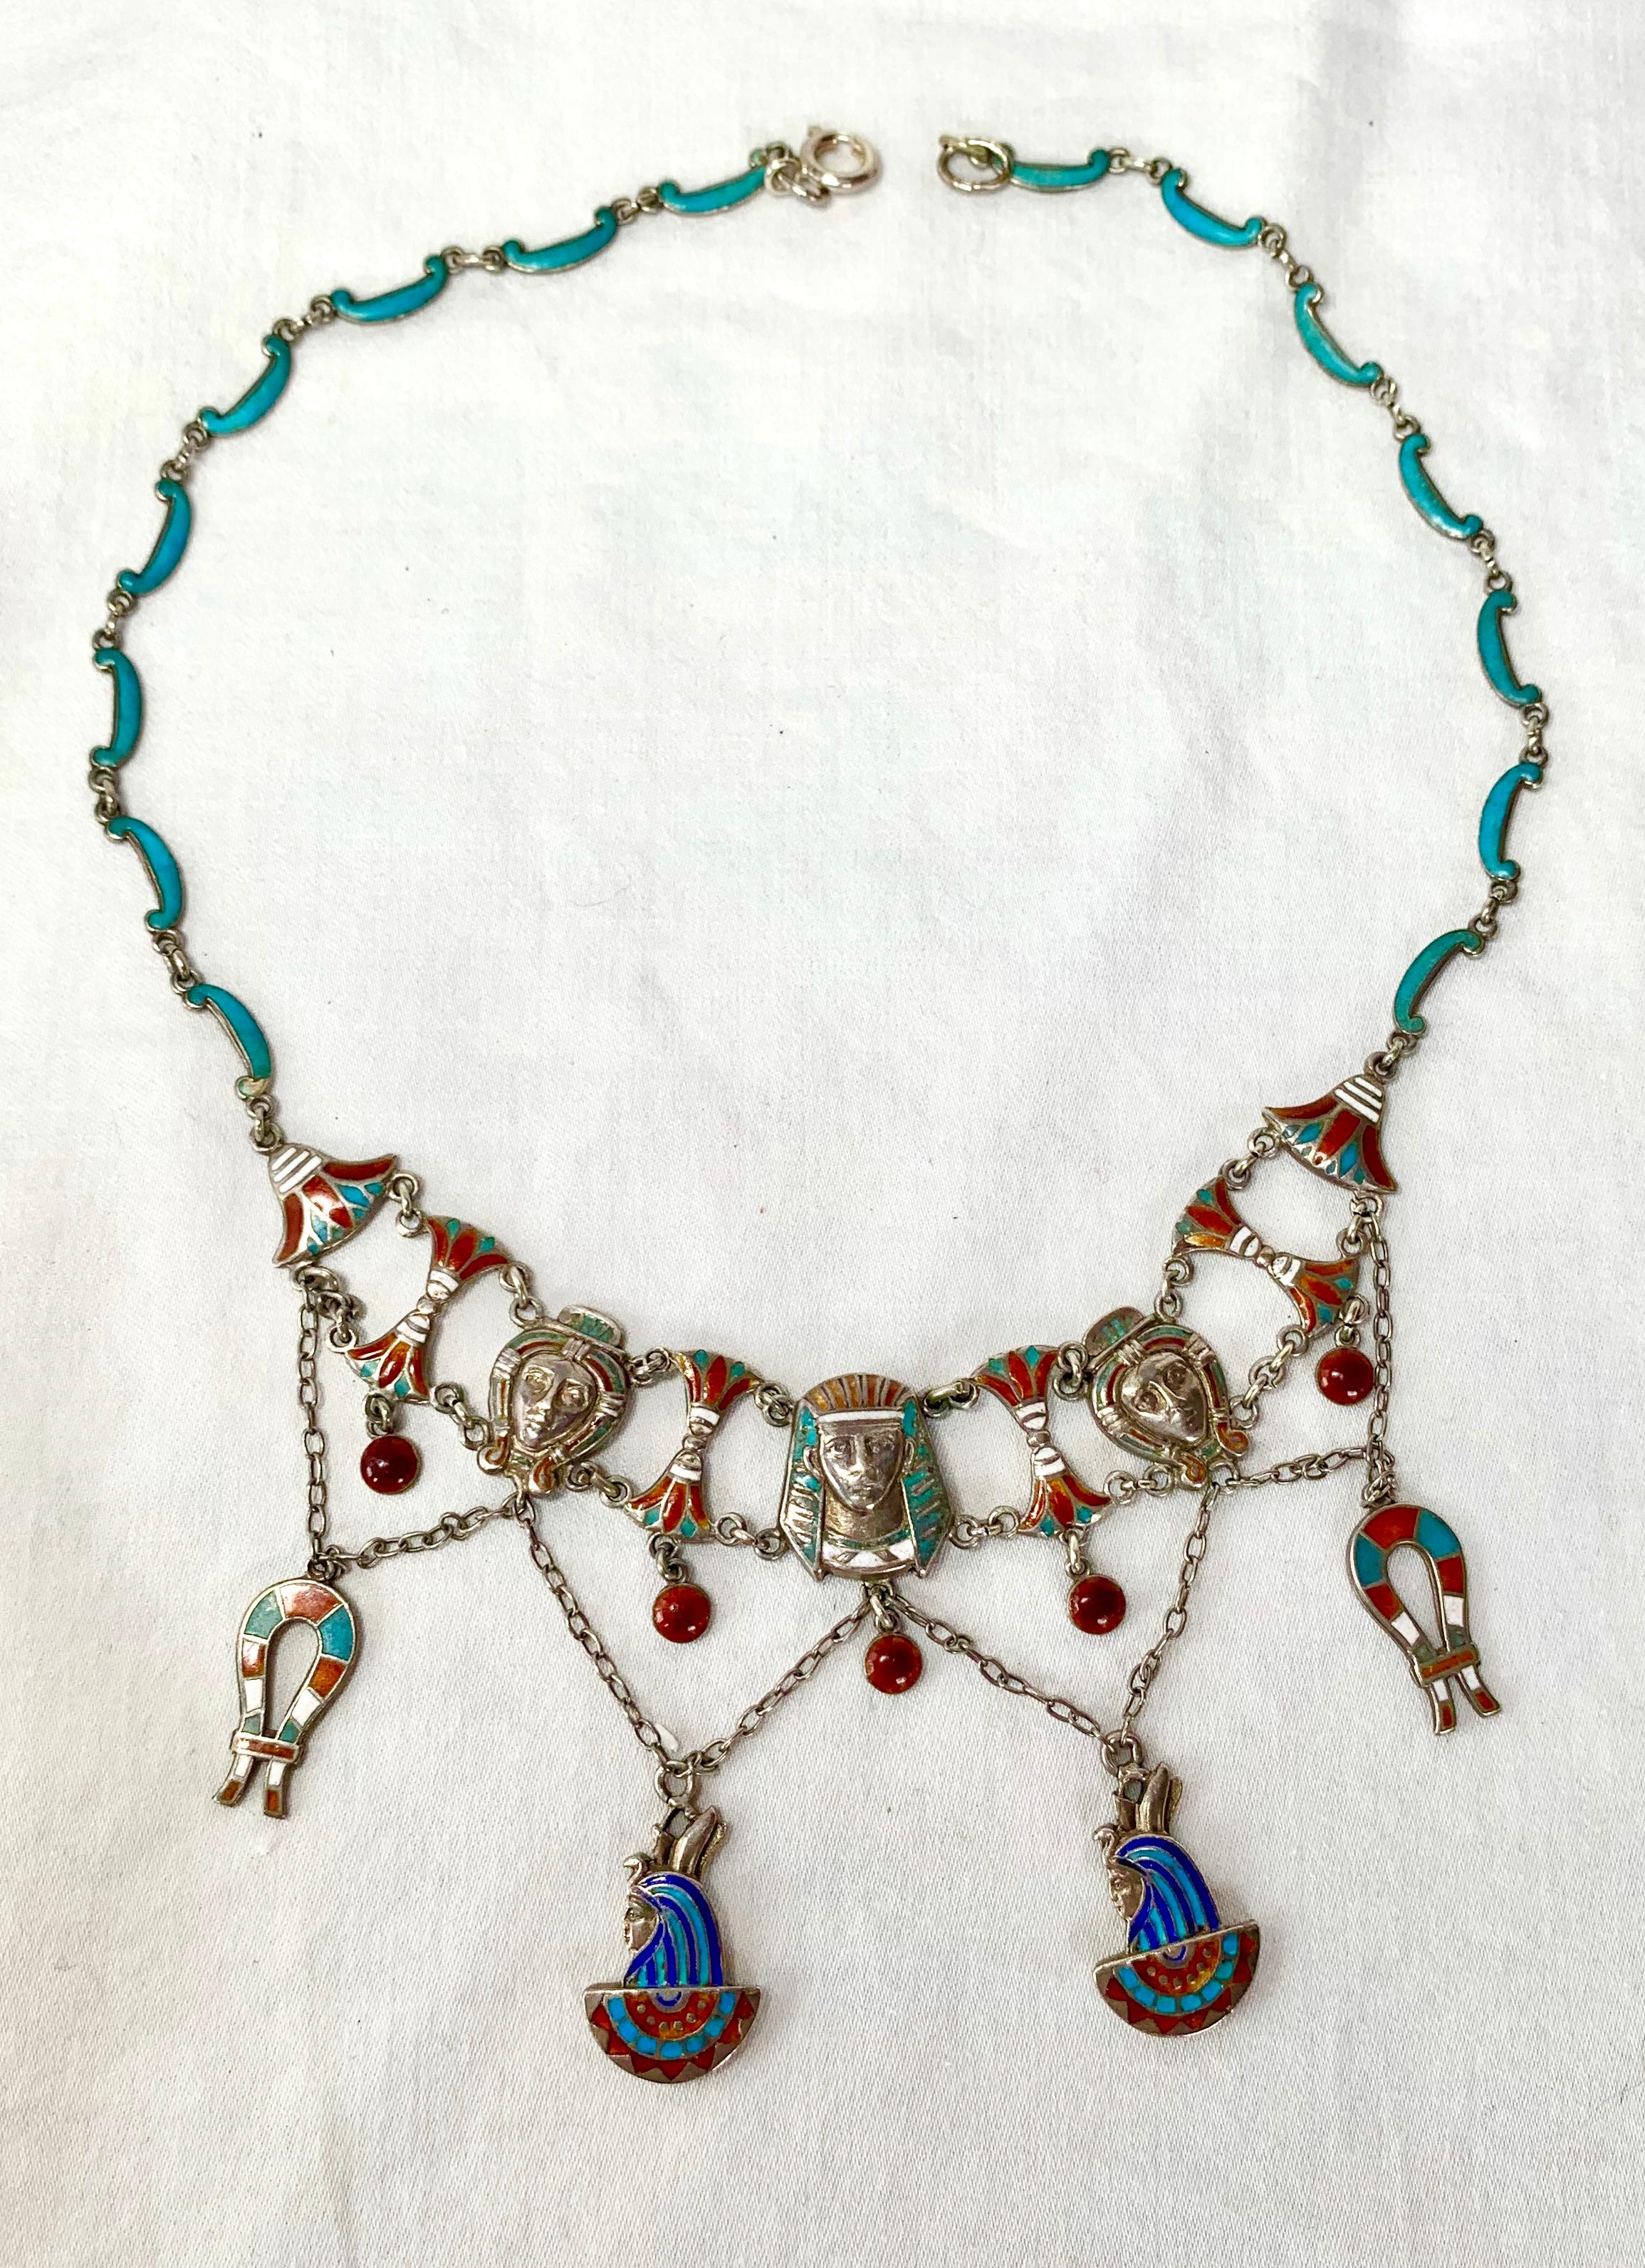 This is a very rare antique Egyptian Revival Necklace in Silver with magnificent enamel work to create an Art Nouveau to Art Deco masterpiece!   The articulated necklace has images of Pharoah, Goddess, Lotus Flower, Hieroglyphics, and Goddess with a